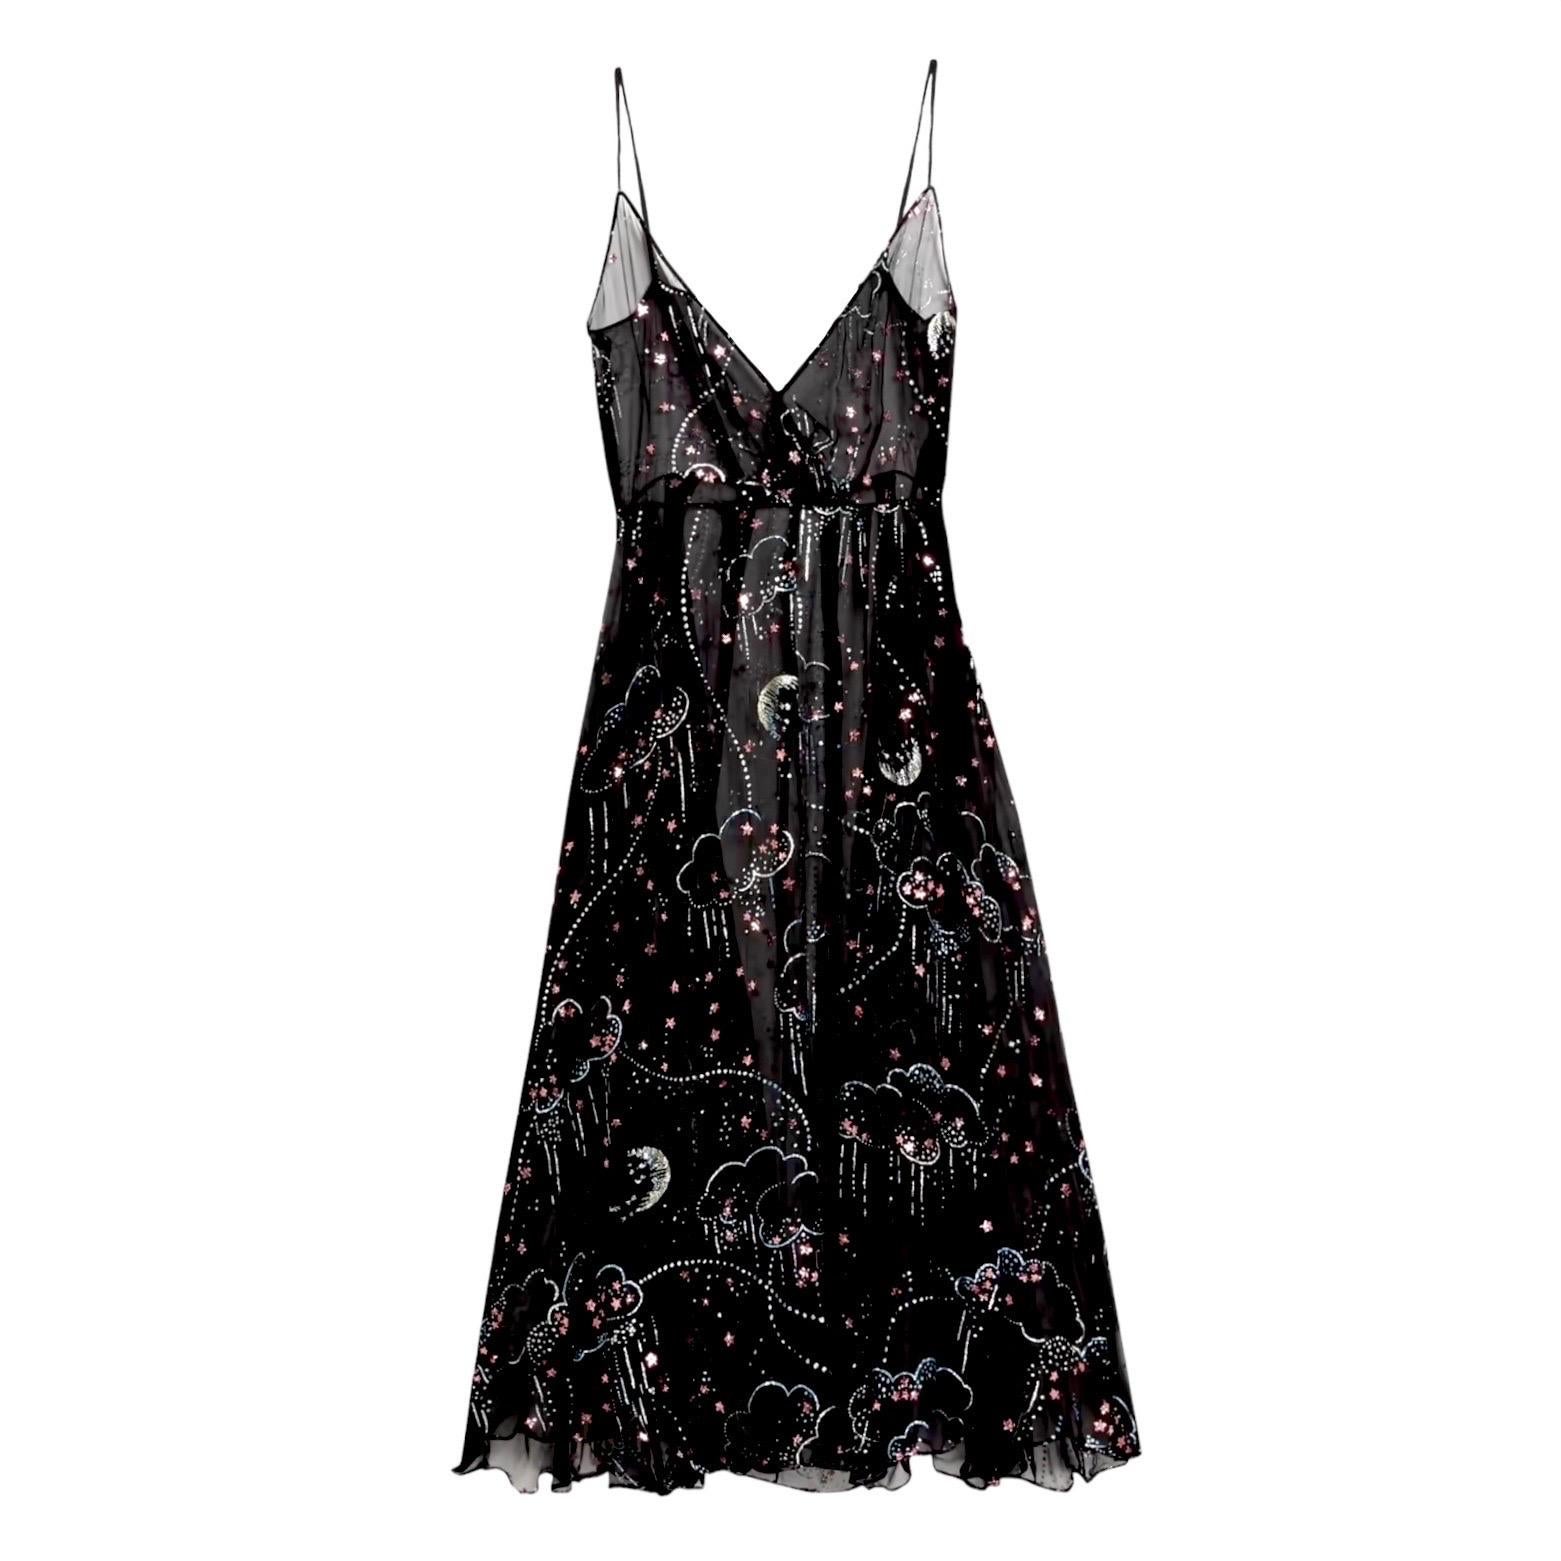 Gorgeous black silk evening gown by VALENTINO
From the FW 2016 collection
Wonderful deep plunge neckline
Clouds glitter motive
A dream seen on Selena Gomez 
Dry Clean only
Made in Italy
Retails for approximately 6800$
Size 42

Please refer to the